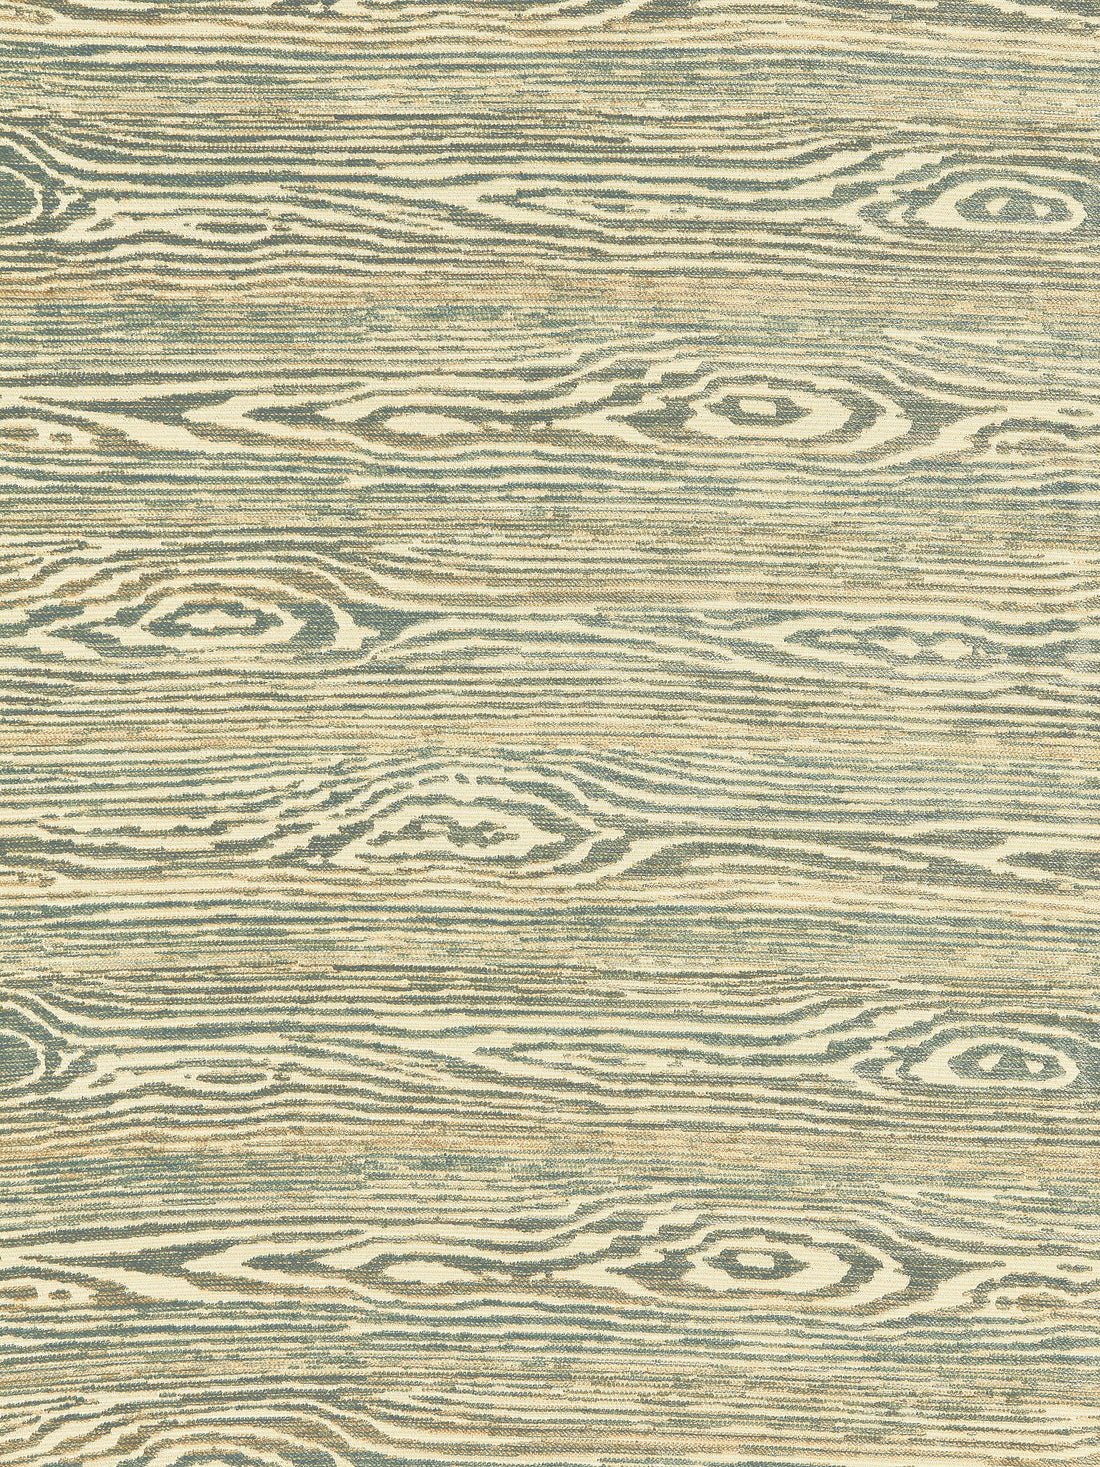 Muir Woods fabric in mineral color - pattern number CD 0011OB41 - by Scalamandre in the Old World Weavers collection